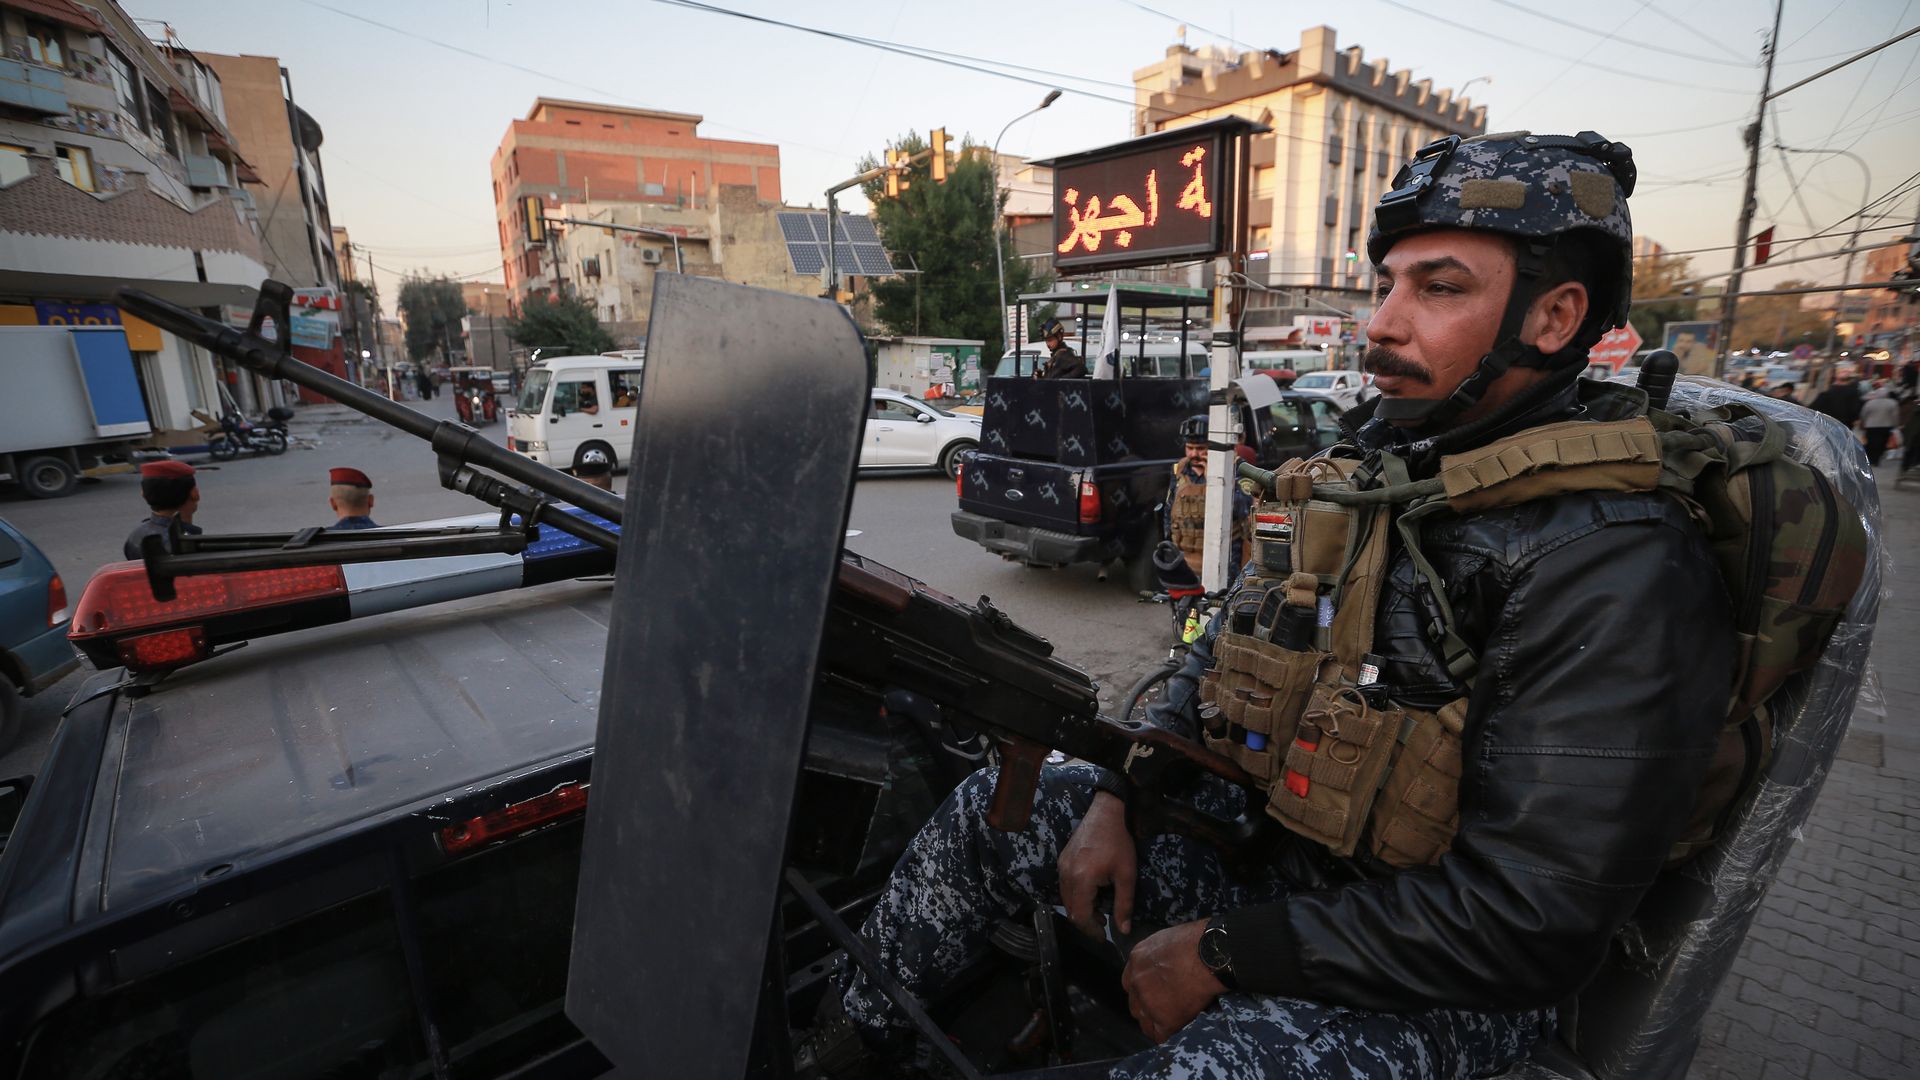 A police officer is shown sitting at a vehicle-borne machine gun after a rocket attack in Baghdad.